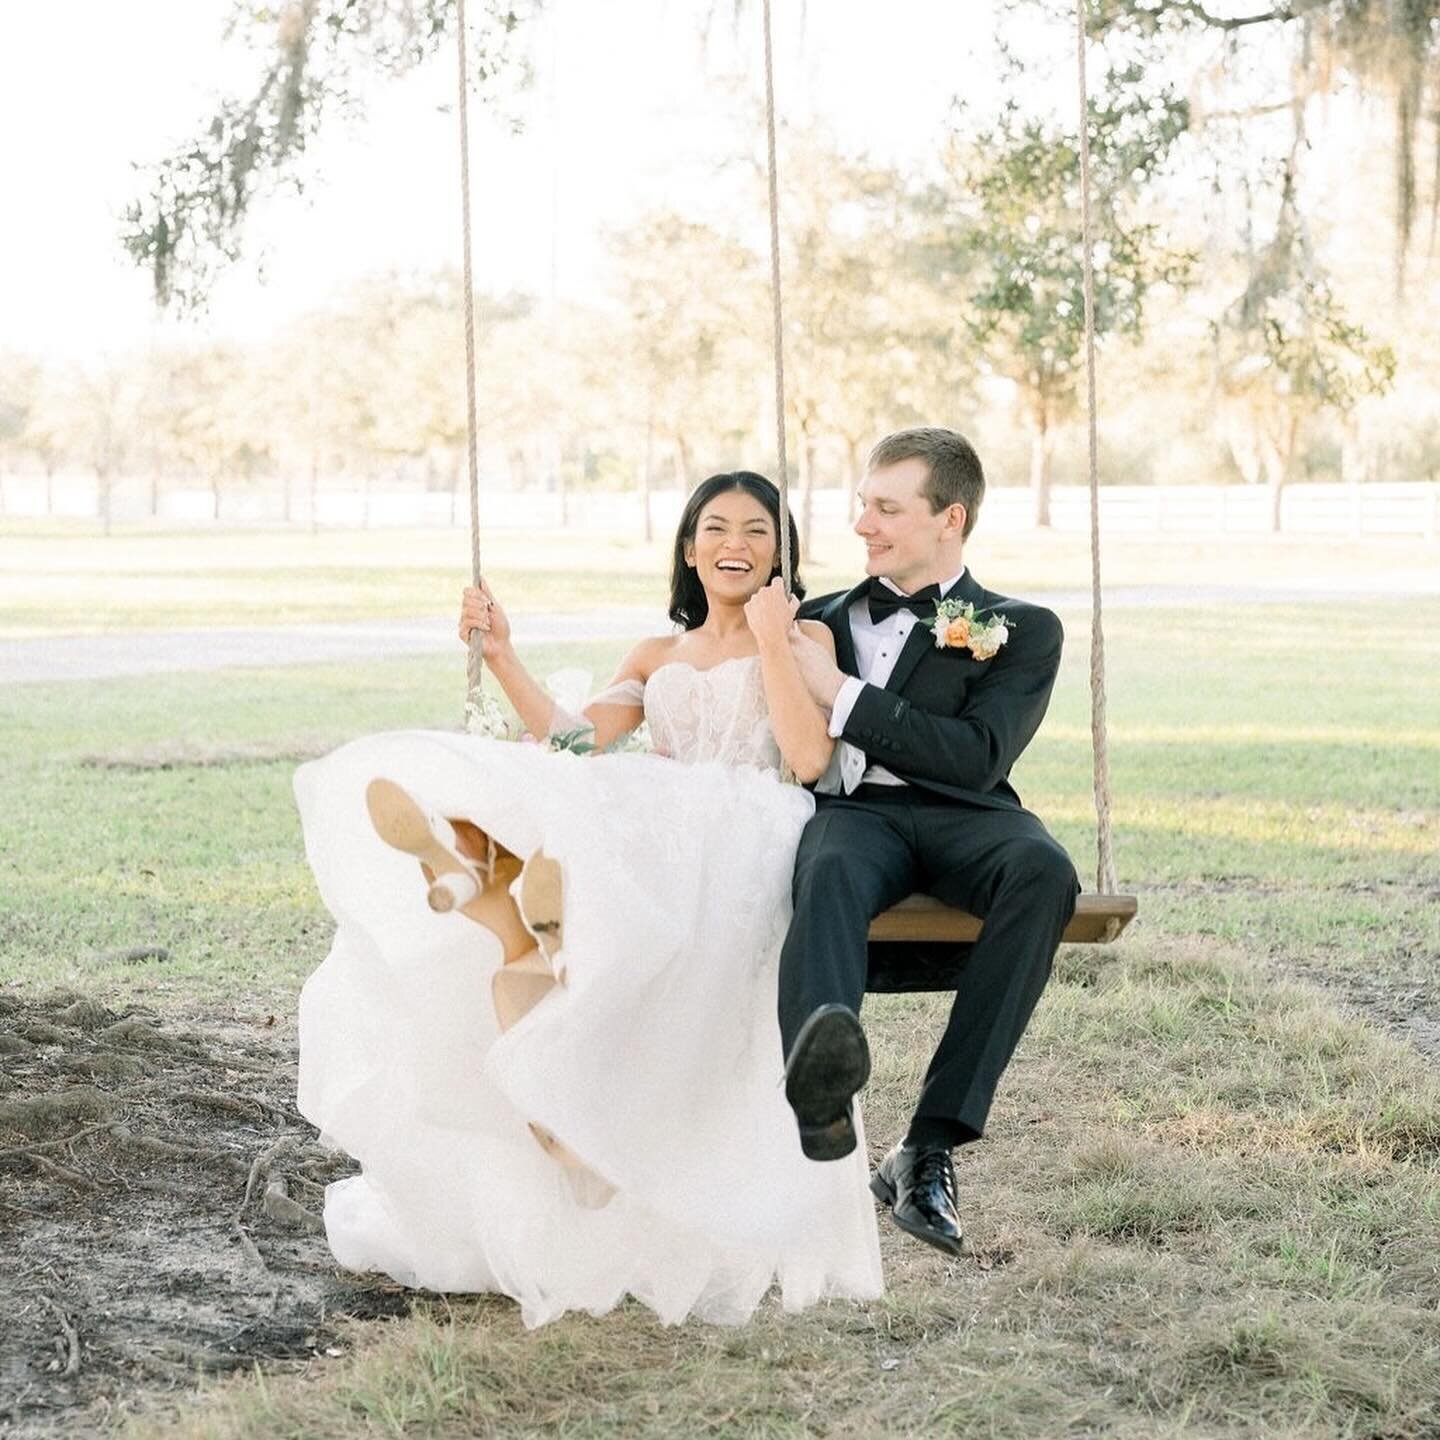 This is what winter wedding dreams are made of. 
⠀⠀⠀⠀⠀⠀⠀⠀⠀
Celebrate your best day ever at Congaree and Penn. Find pricing and information about weddings at the link in our profile.
⠀⠀⠀⠀⠀⠀⠀⠀⠀
Hot tips!
⠀⠀⠀⠀⠀⠀⠀⠀⠀
1. We offer lower venue rental rates o